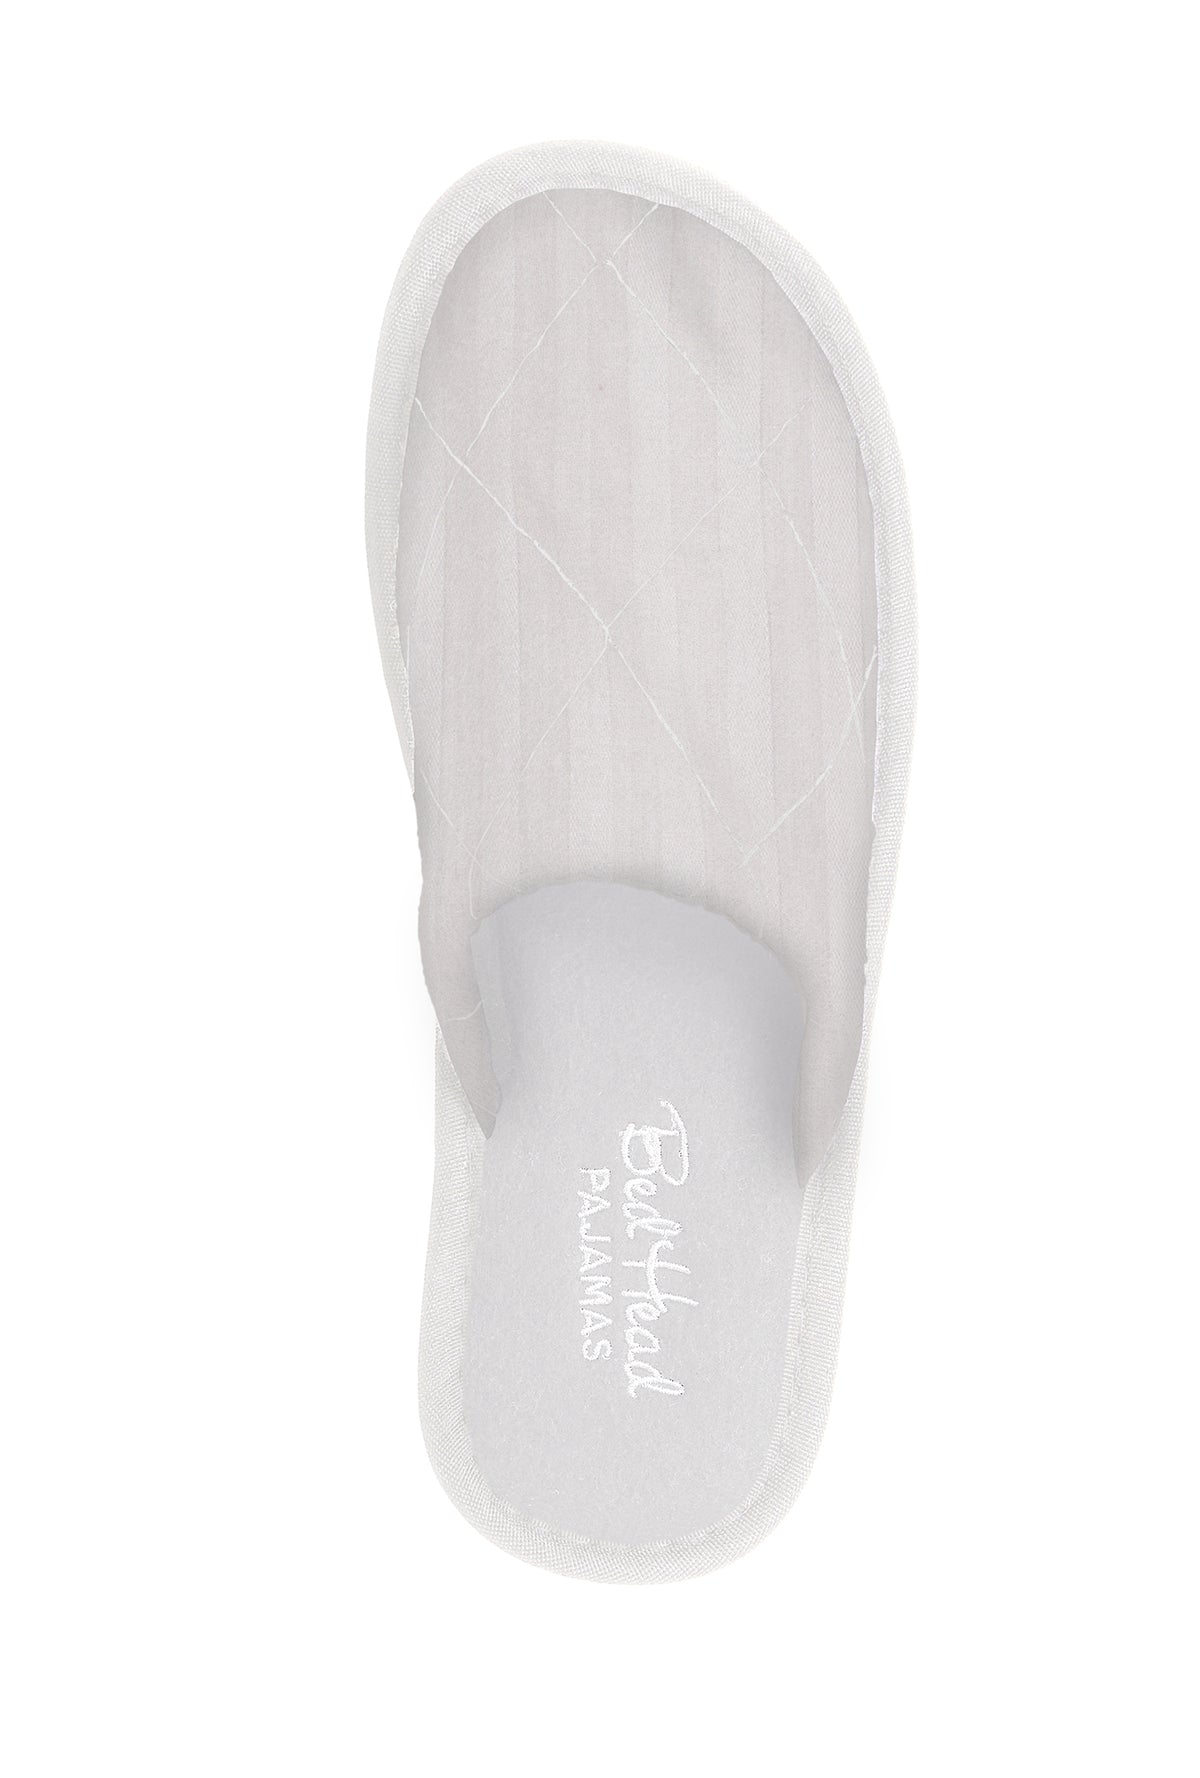 White 3D Stripe French Terry Lined Woven Cotton Unisex Slippers